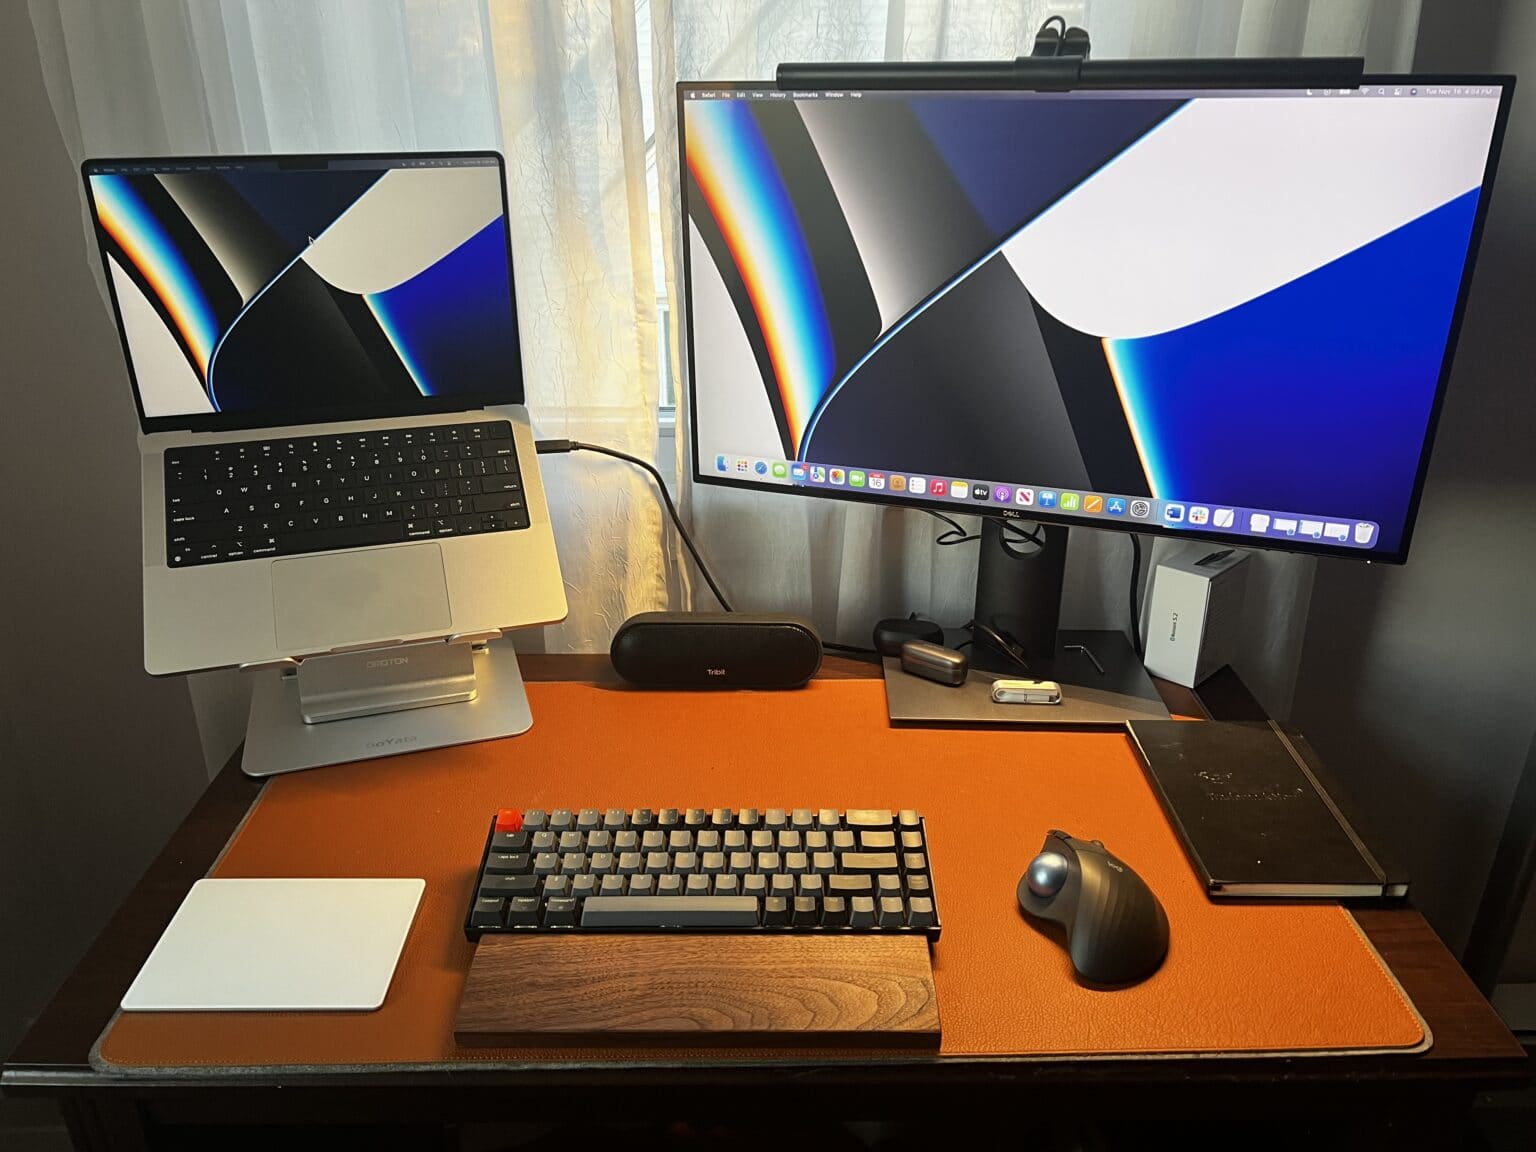 In round 2, I experiment with an open laptop stand, a mechanical keyboard with a wrist rest, a Magic Trackpad 2, an ergonomic mouse with a trackball and a monitor light bar.